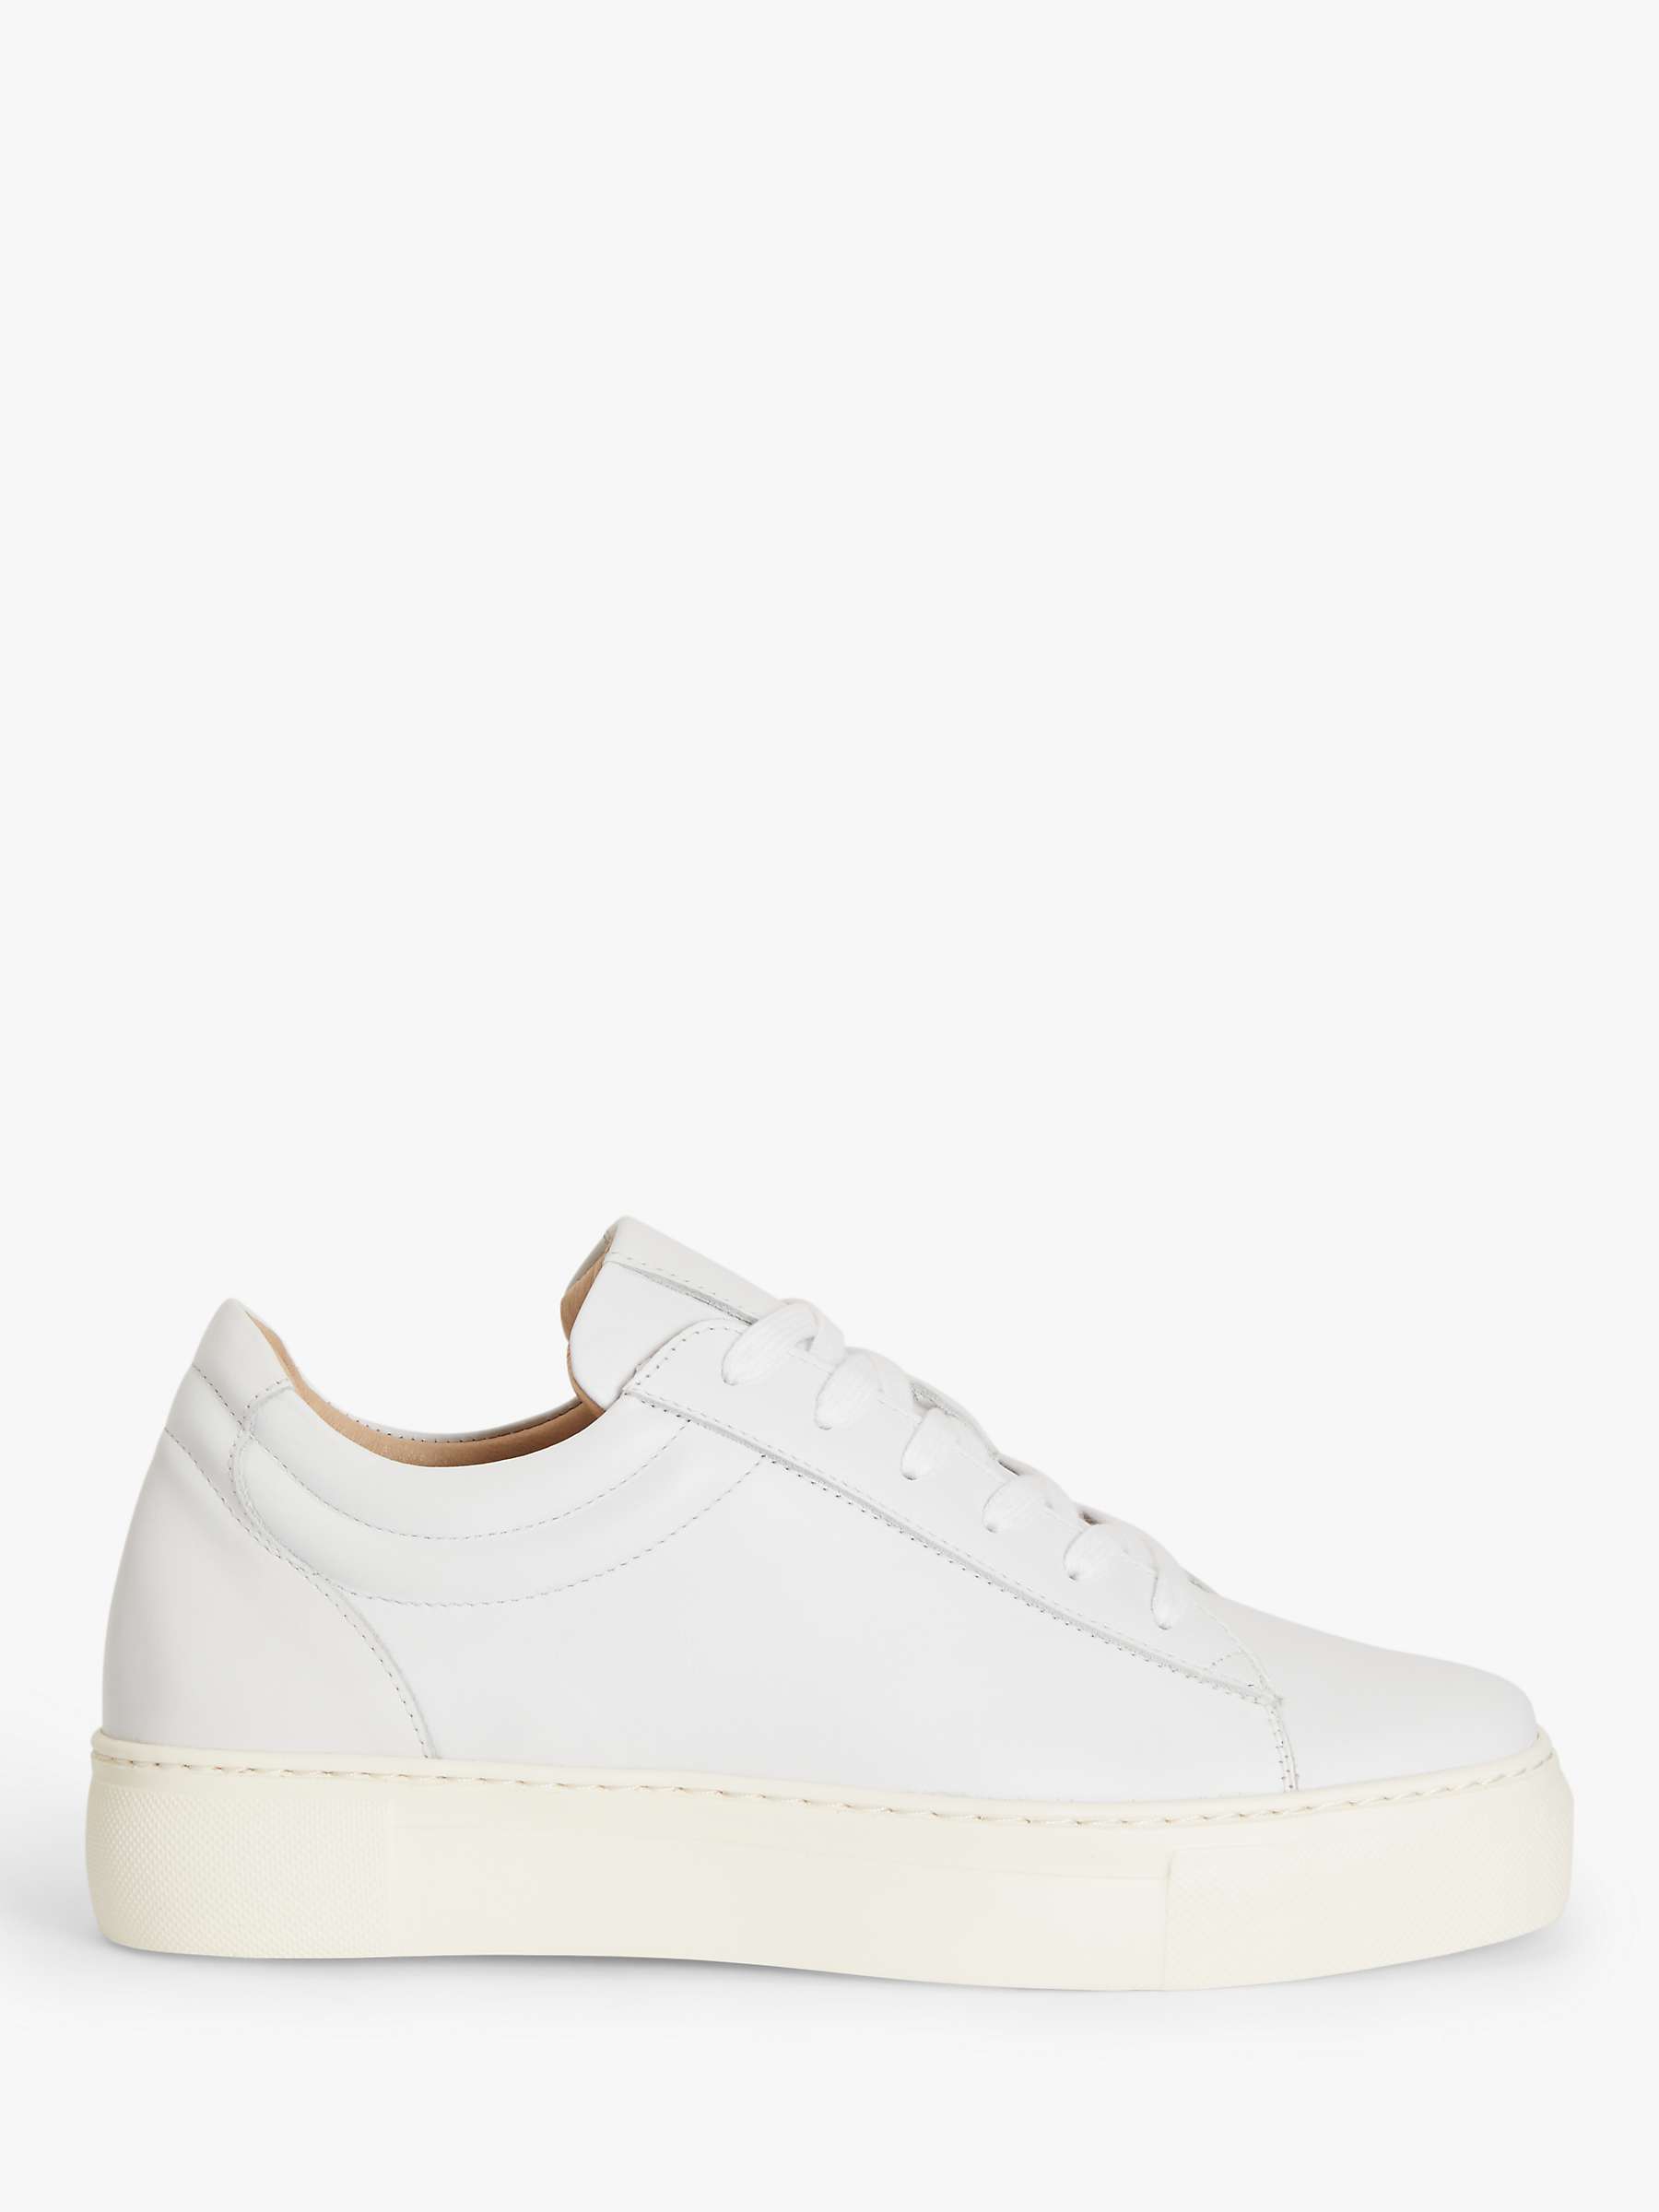 Buy John Lewis Fauna Leather Flatform Lace Up Trainers Online at johnlewis.com